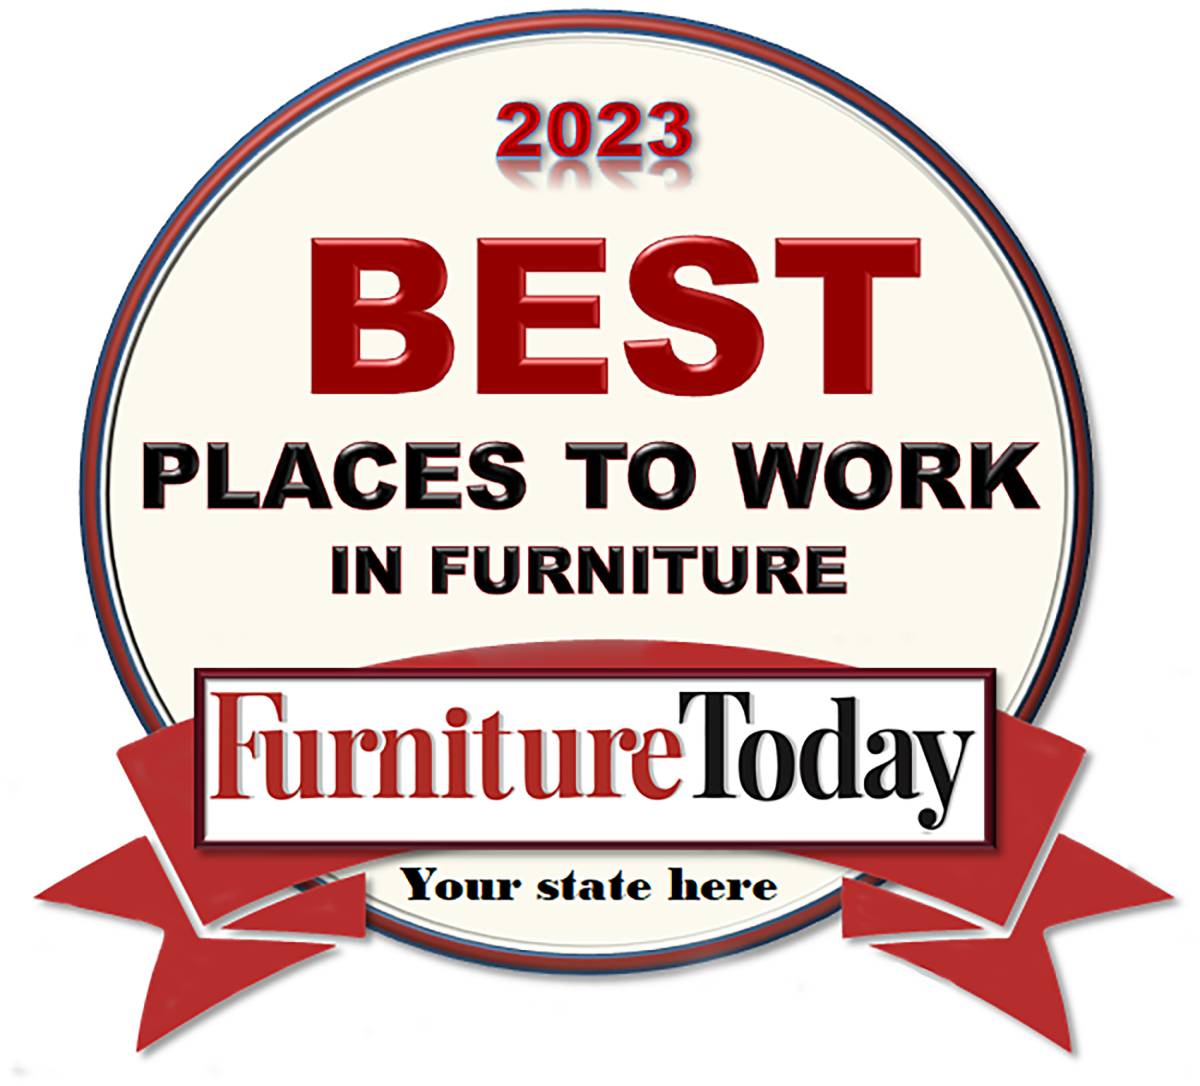 Furniture Today's Best Places to Work Logo